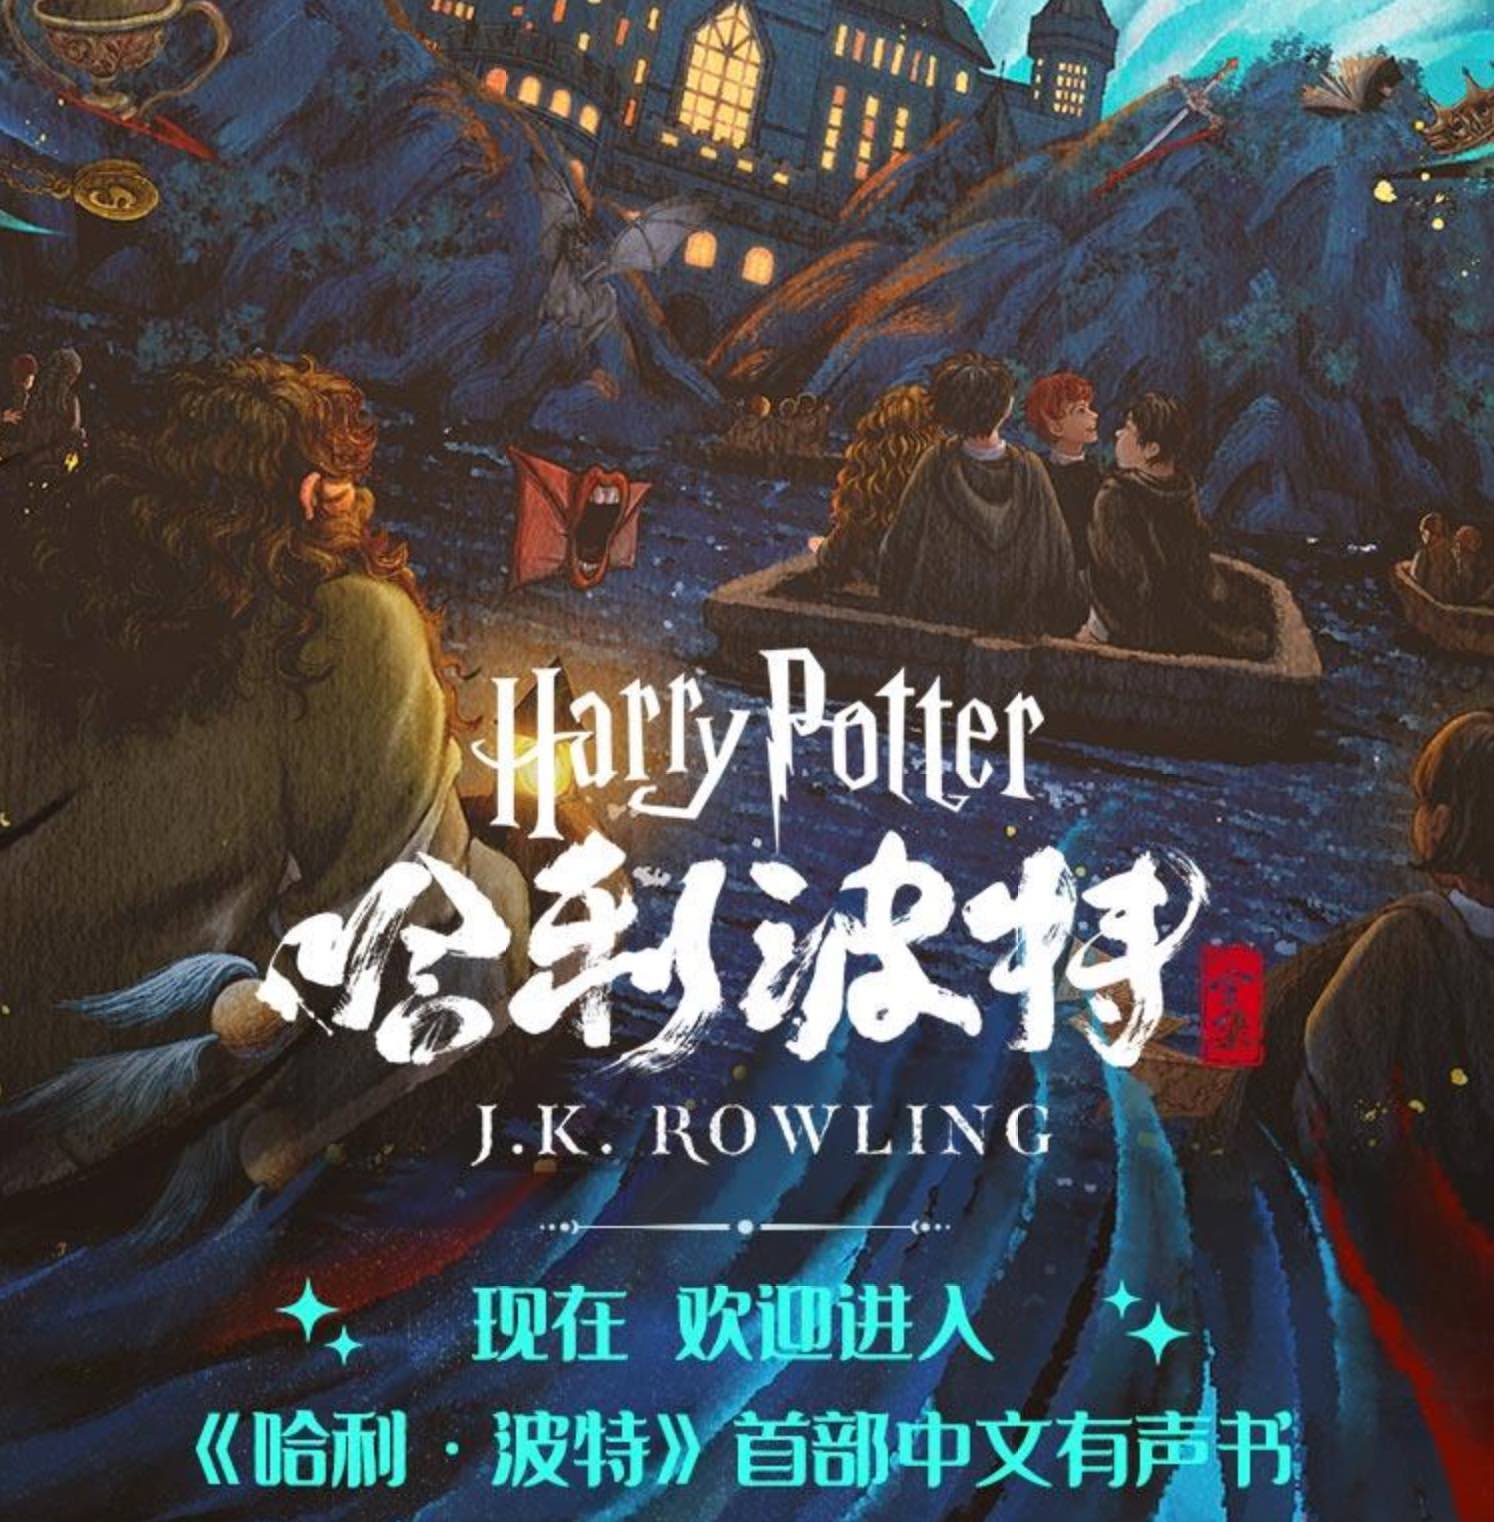 The Language of Magic: Harry Potter Audiobooks in Different Languages